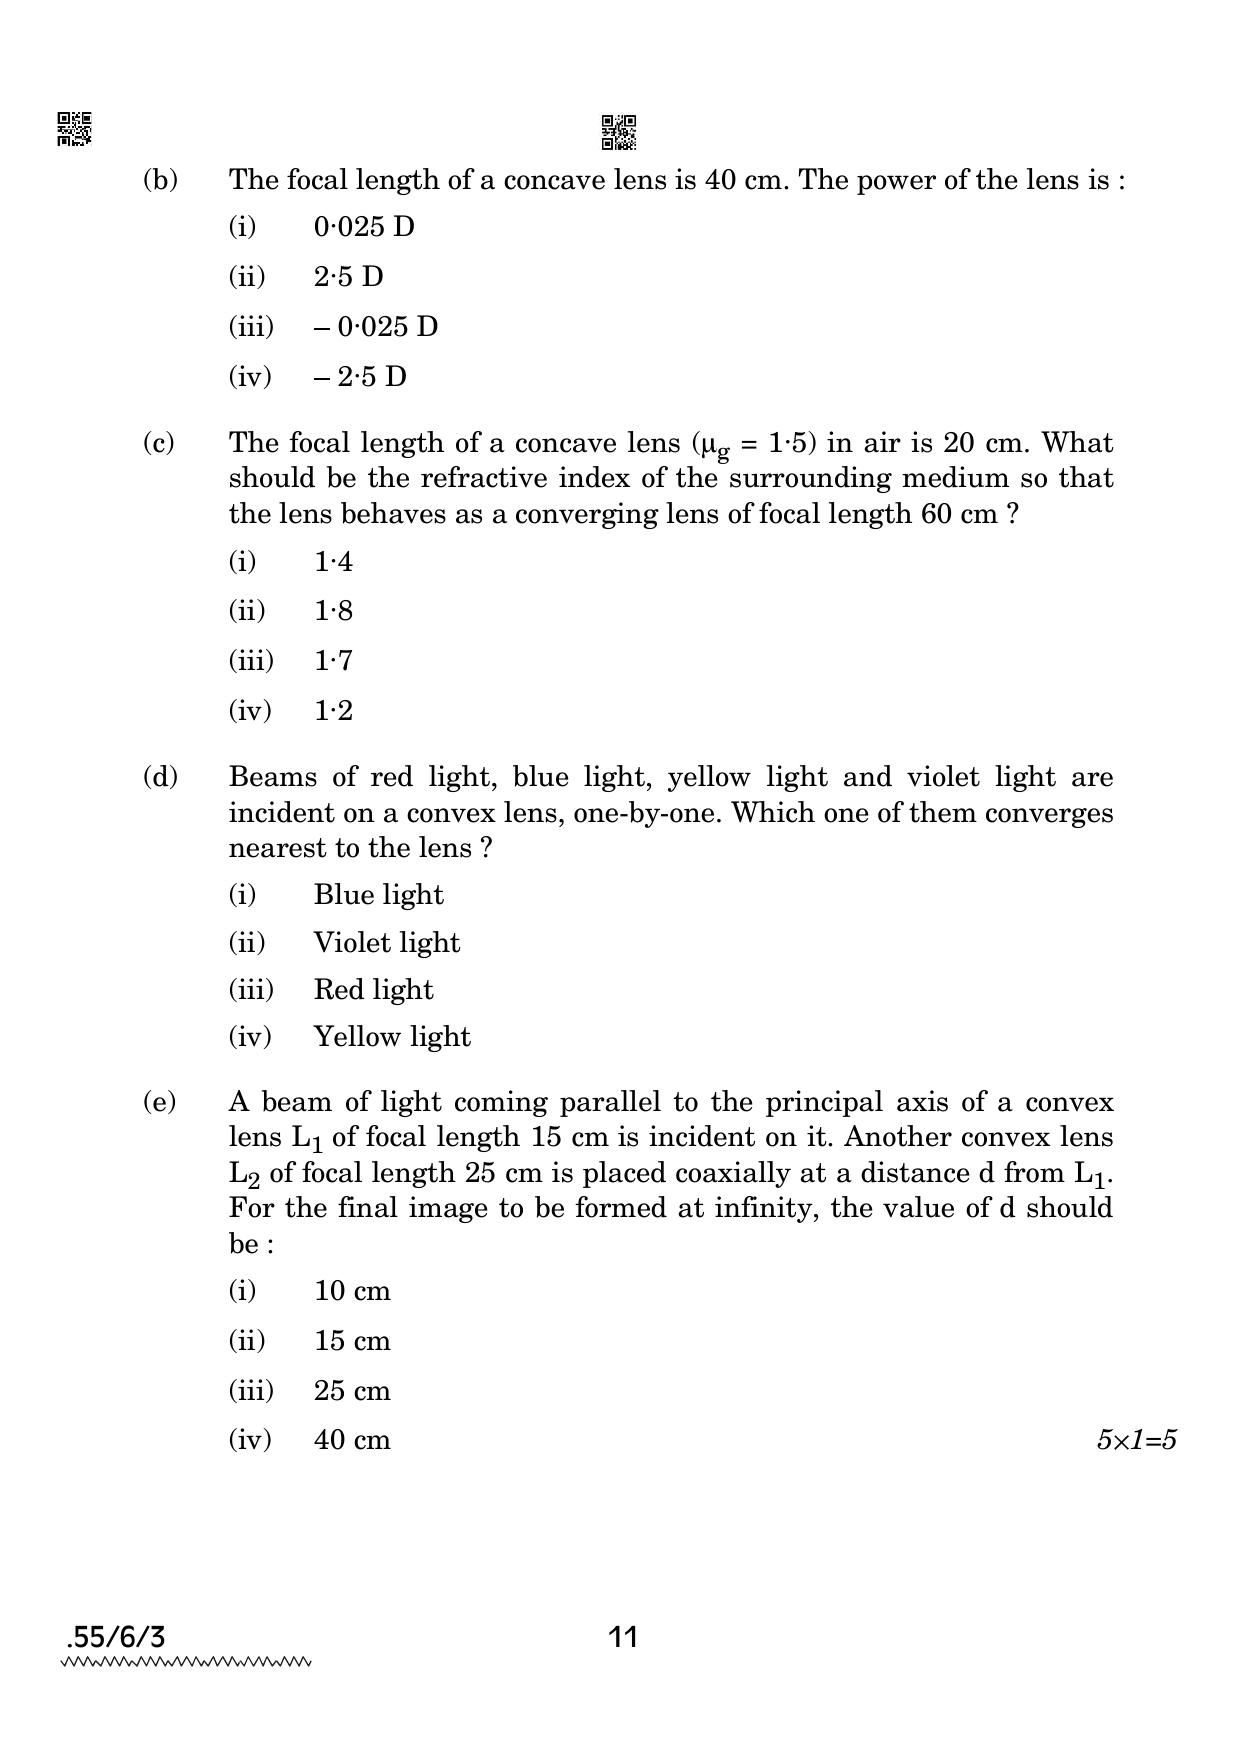 CBSE Class 12 55-6-3 PHYSICS 2022 Compartment Question Paper - Page 11